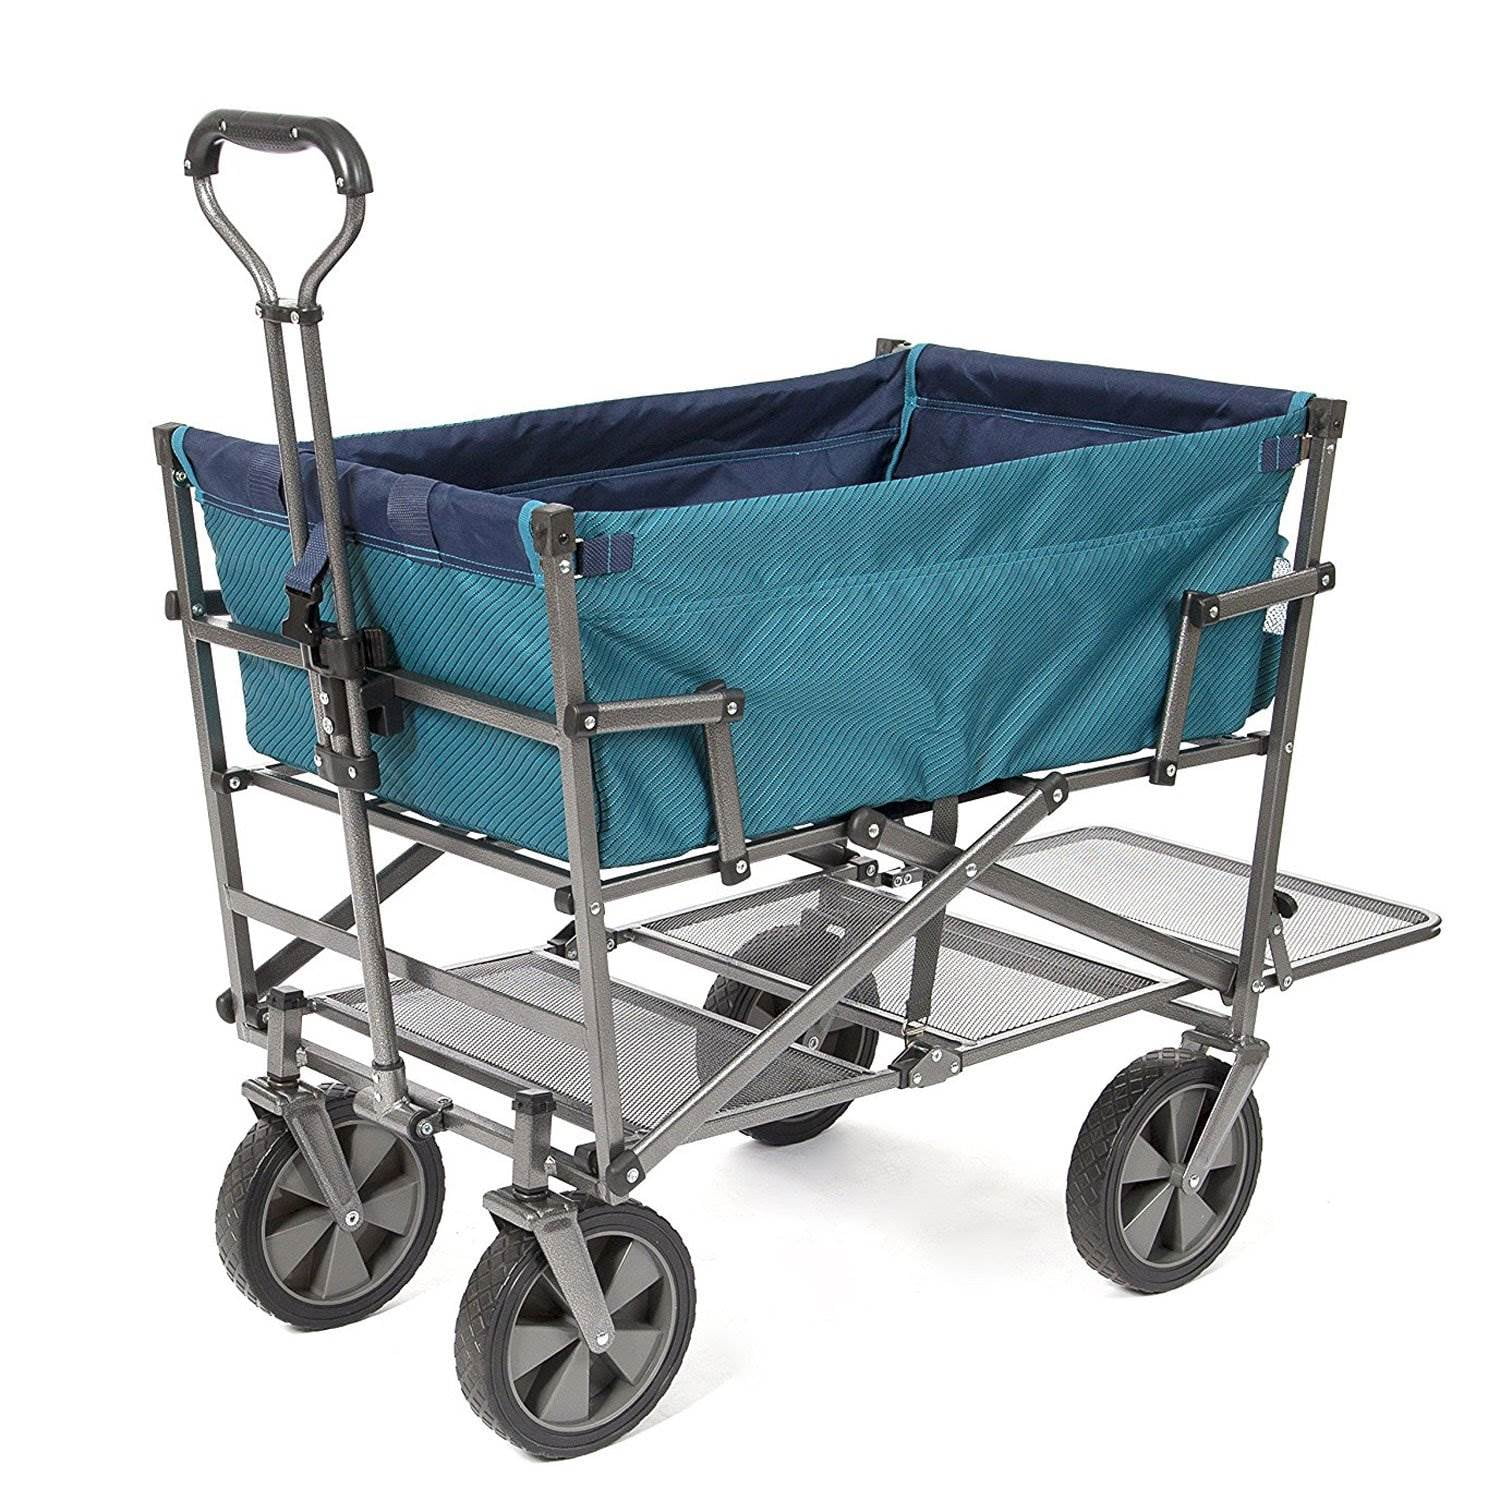 Two Tone Gray Collapsible Fold up Wagon w/Wheels MacSports Double Decker Collapsible Outdoor Utility Wagon with Straps Folding Pull Cart for Sports Baseball Pool Camping Fishing Heavy Duty Steel 